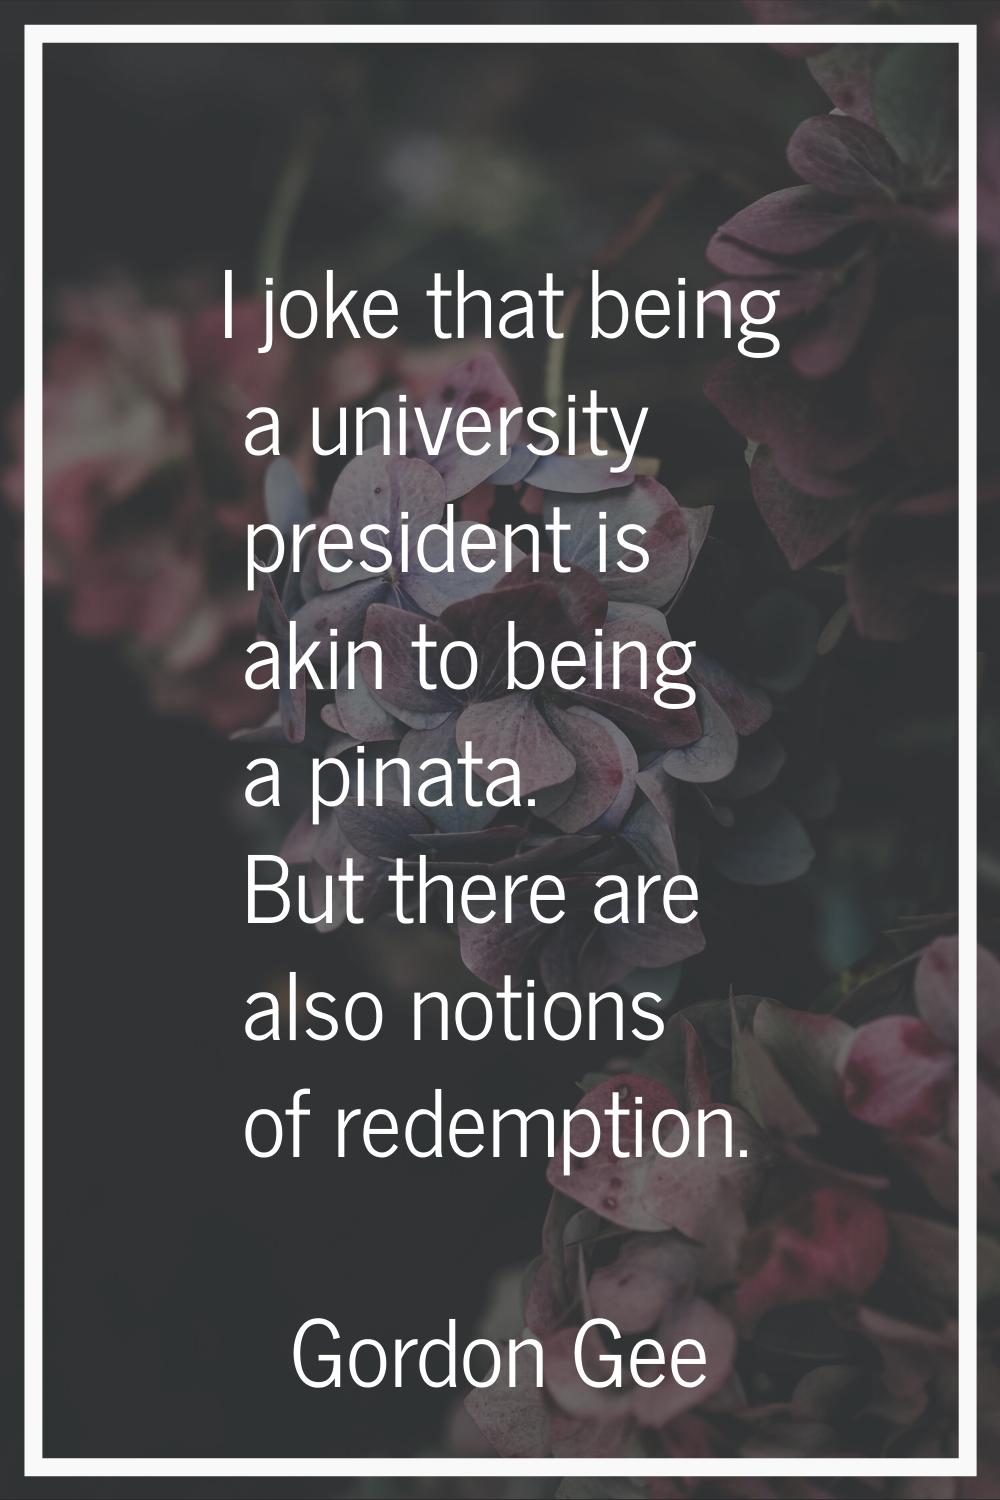 I joke that being a university president is akin to being a pinata. But there are also notions of r